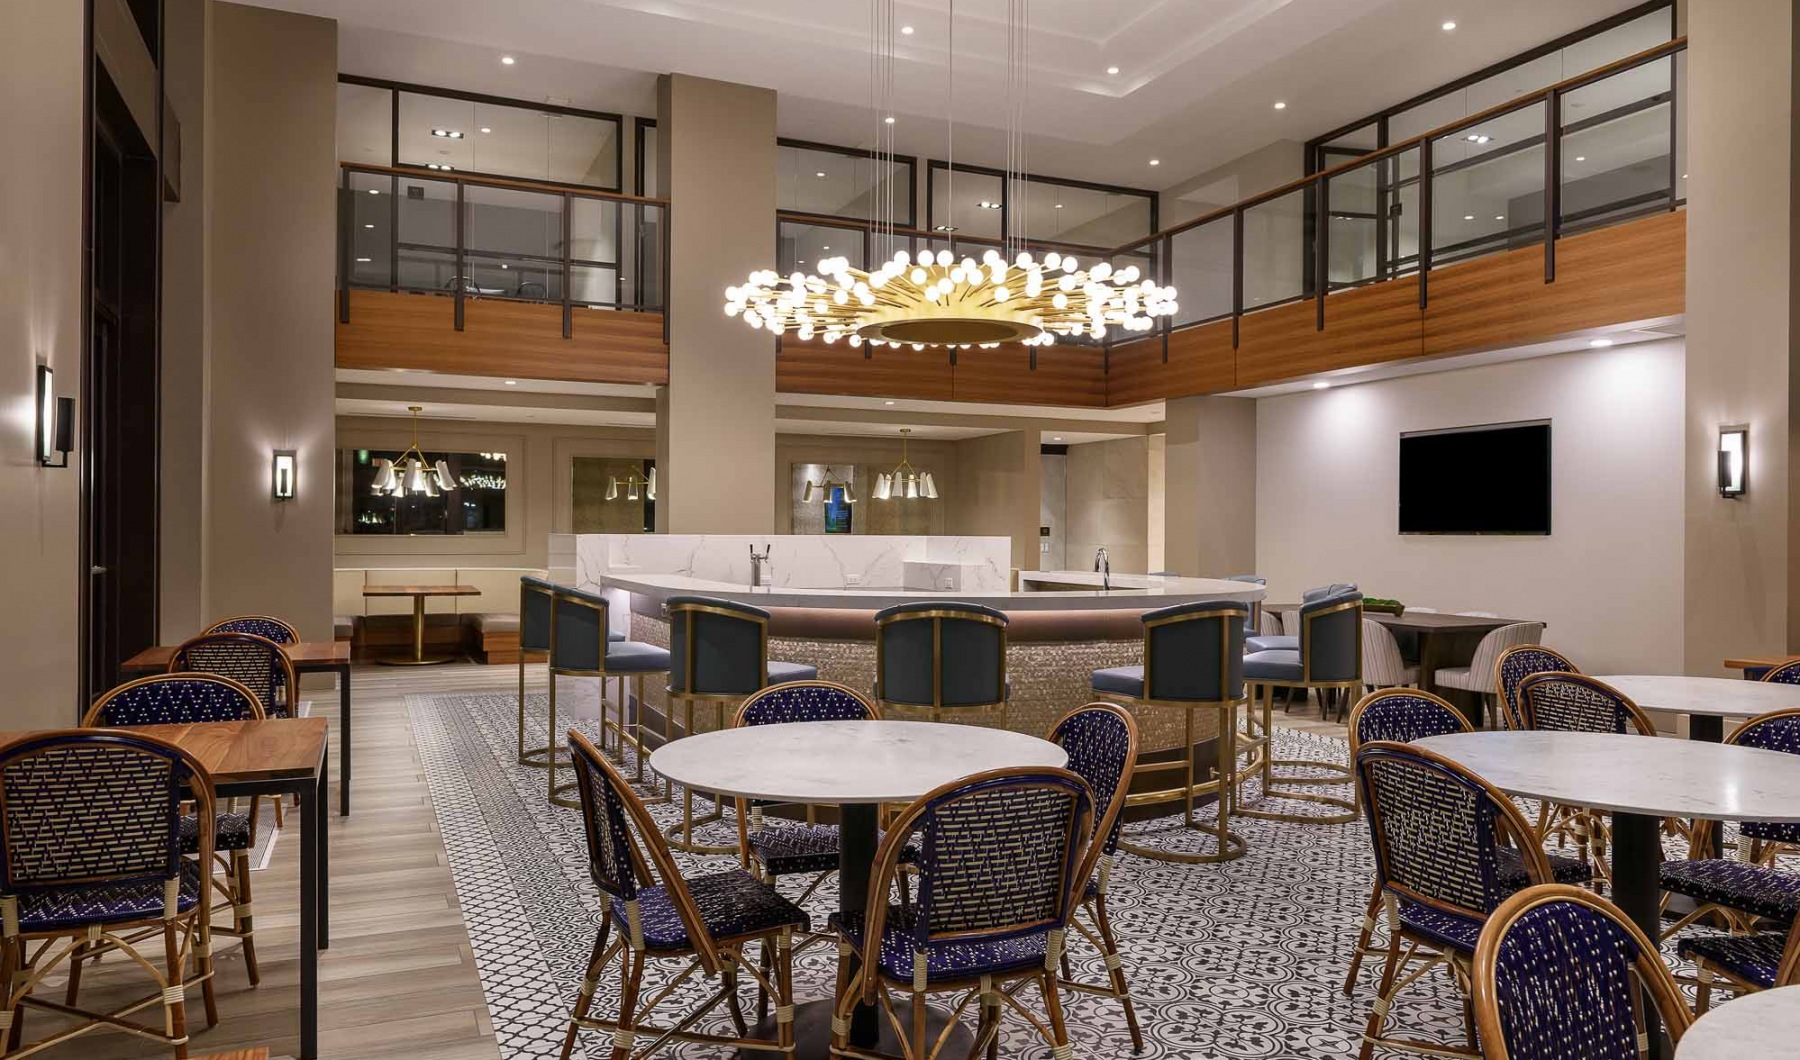 Indoor community dining area with large chandelier and dining tables with blue chairs 